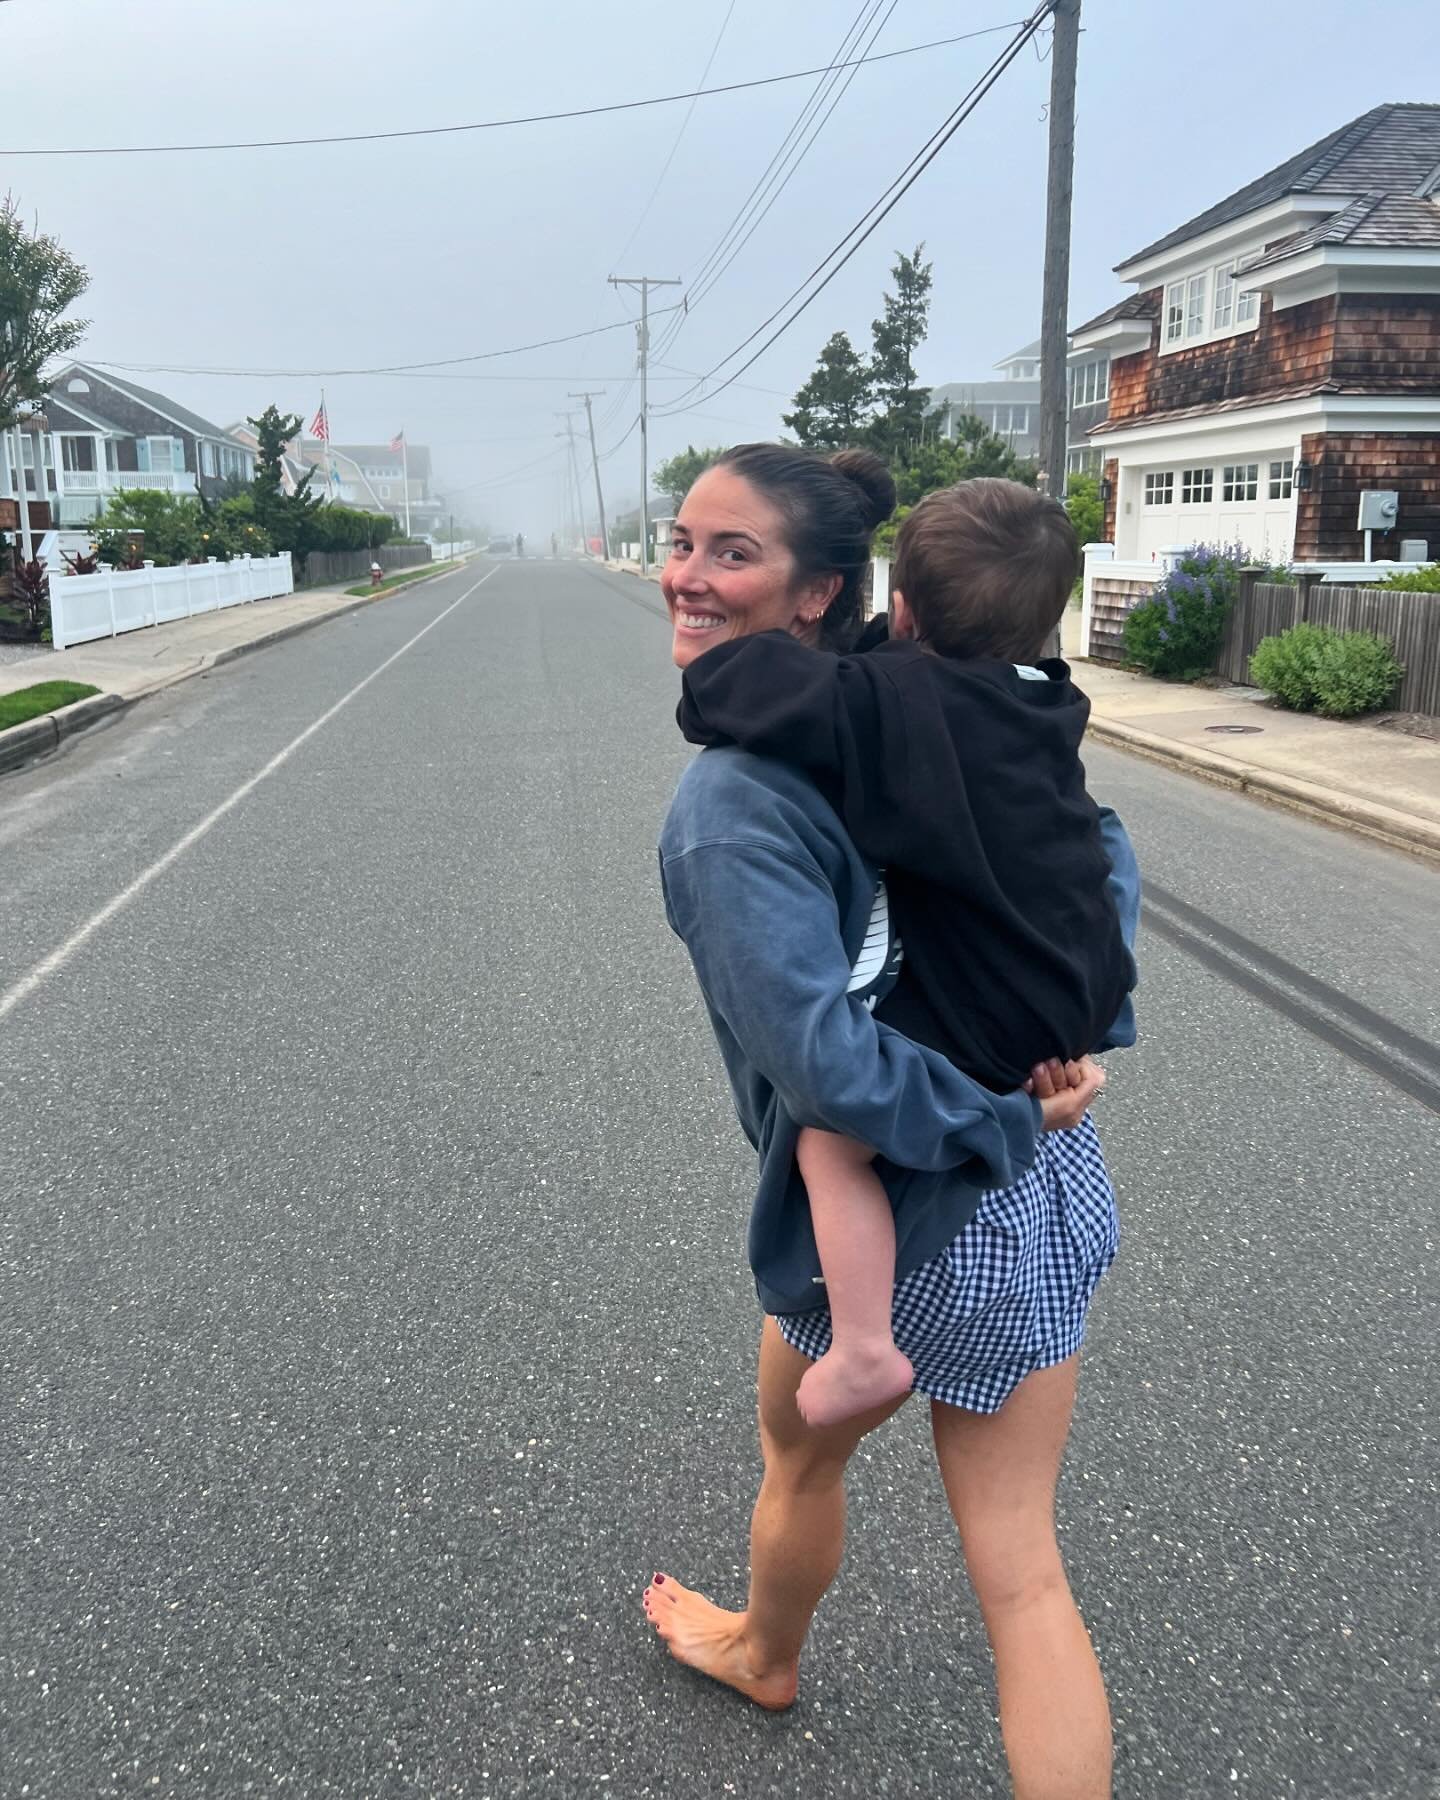 Things that made me smile this week
1- &ldquo;summer surprises&rdquo; aka getting our toddler out of bed because he said he wasn&rsquo;t tired and surprising him with a trip down to the beach to watch the dogs play
2- date night
3- beach happy hours
